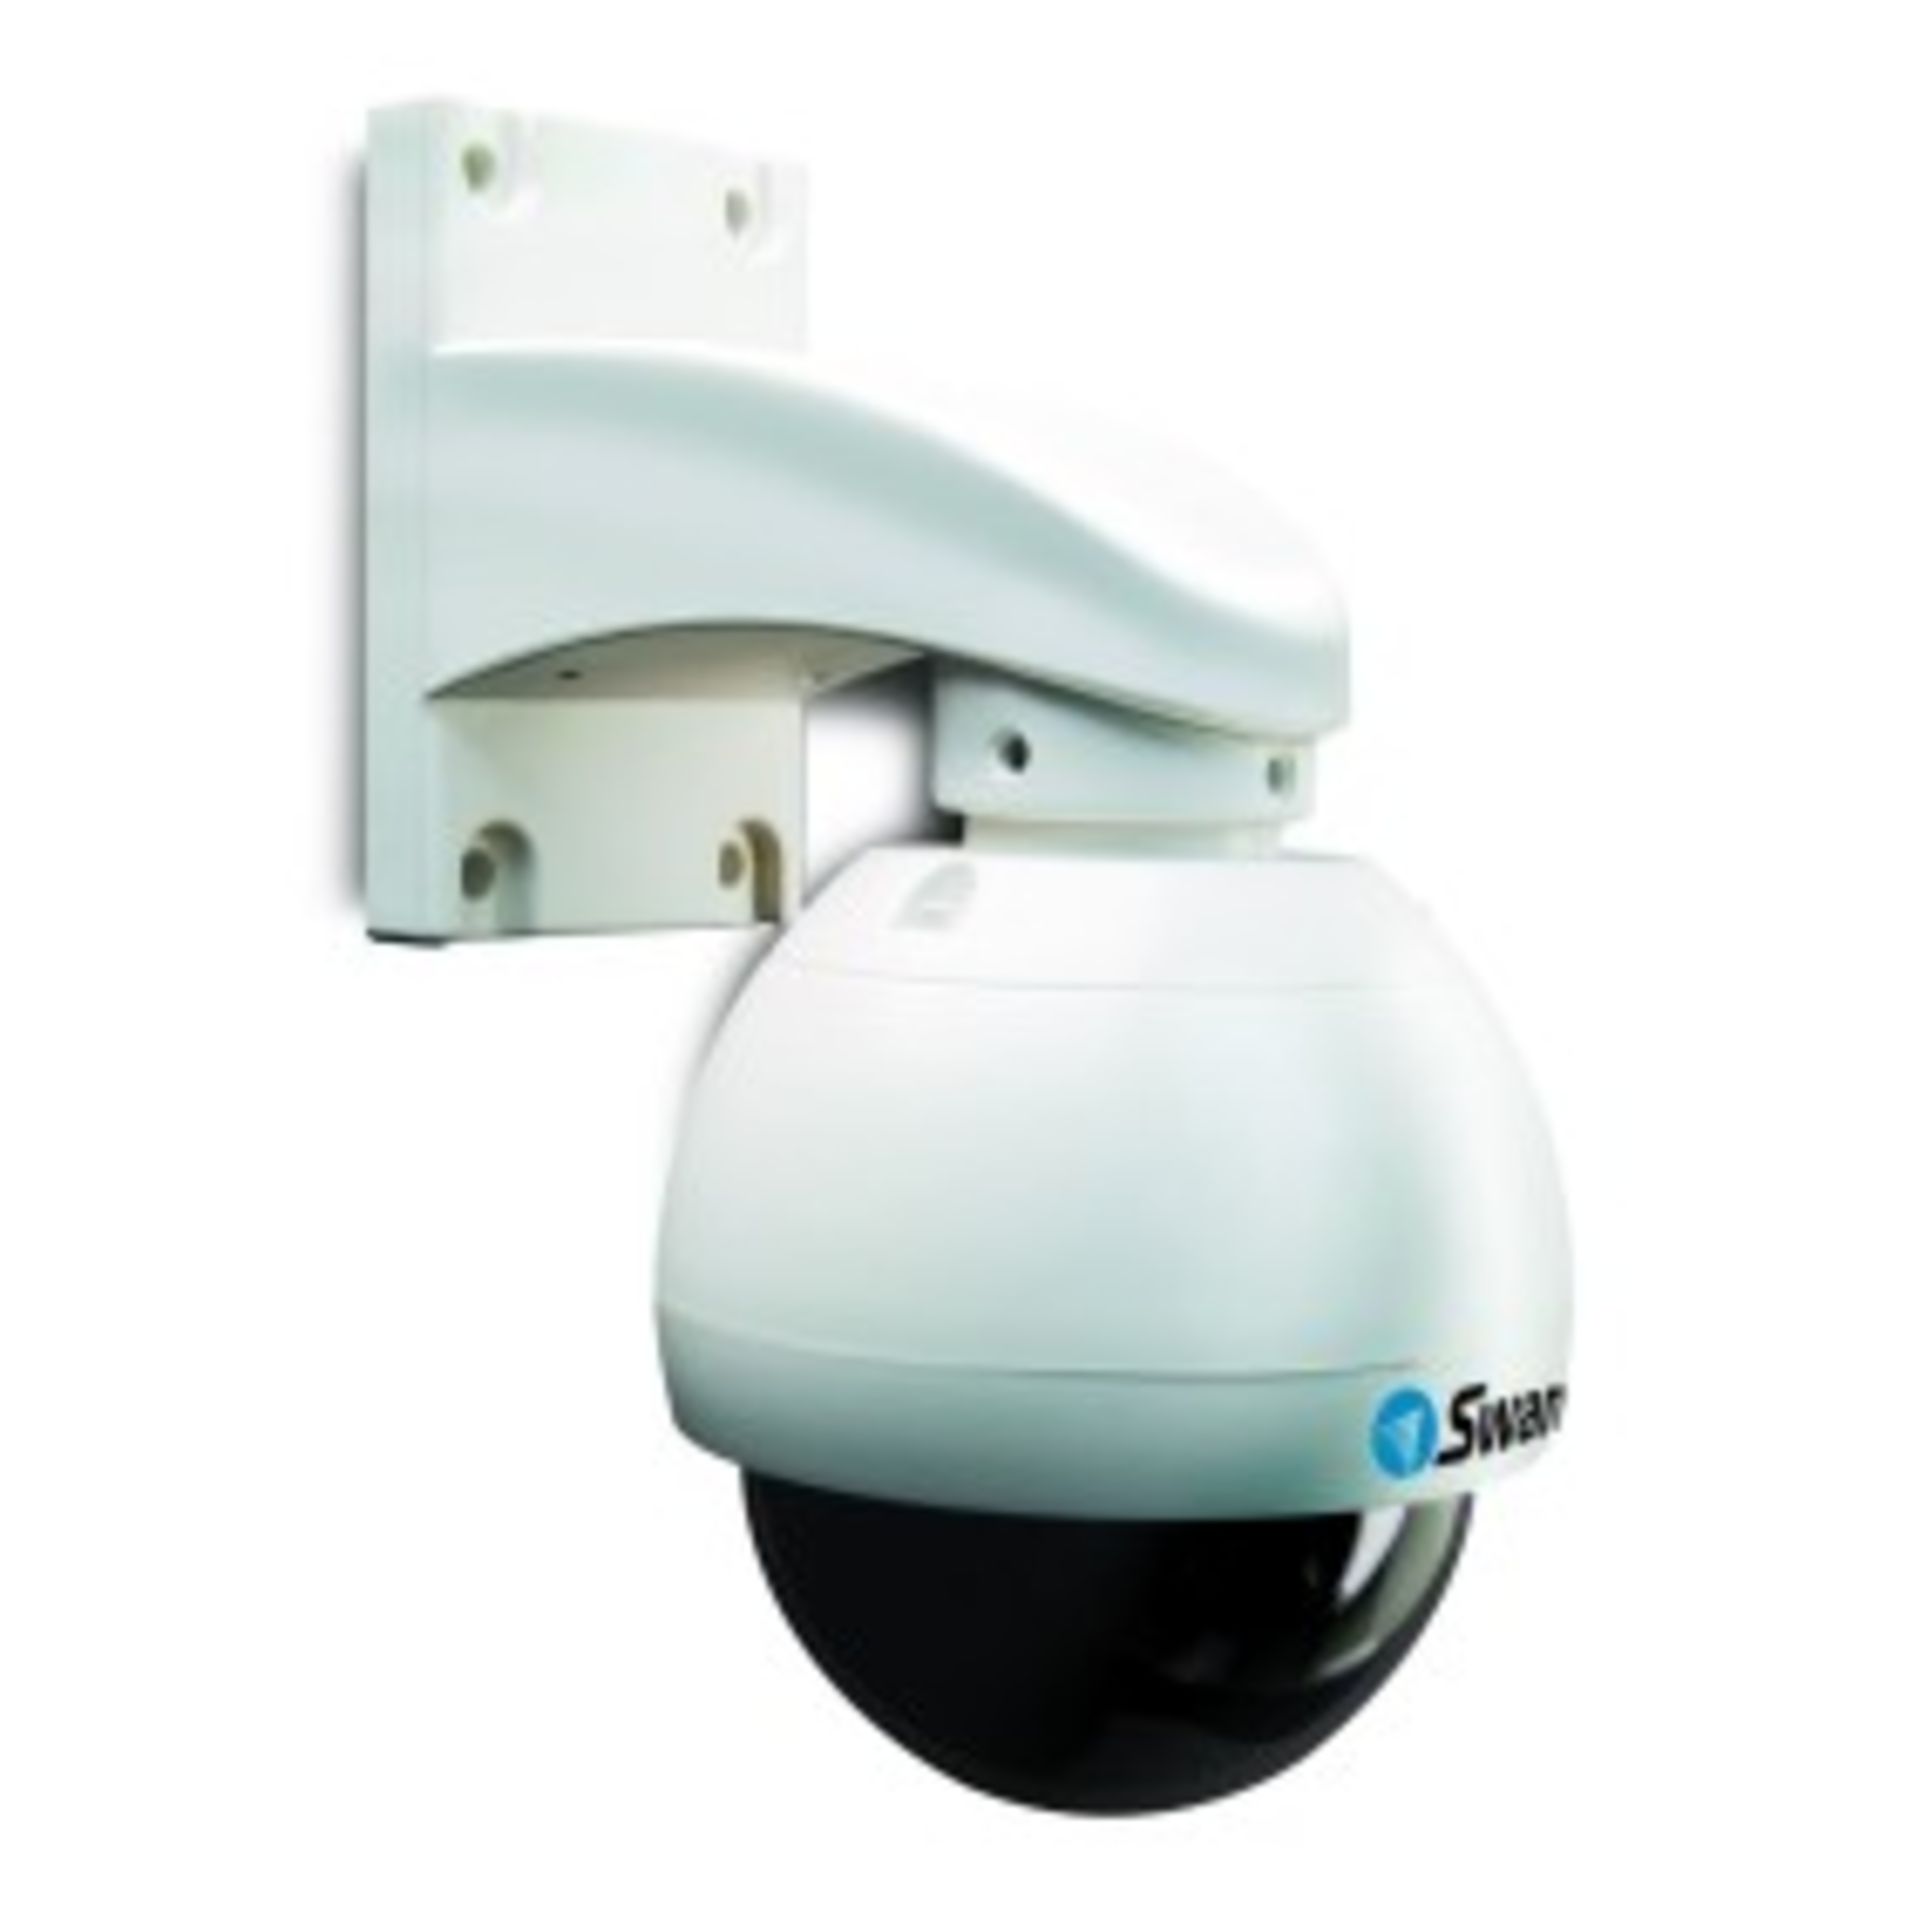 V Brand New Swann PRO-750 700TVL PTZ (Pan Tilt Zoom) Dome Camera - Variable Viewing Angle From 30 to